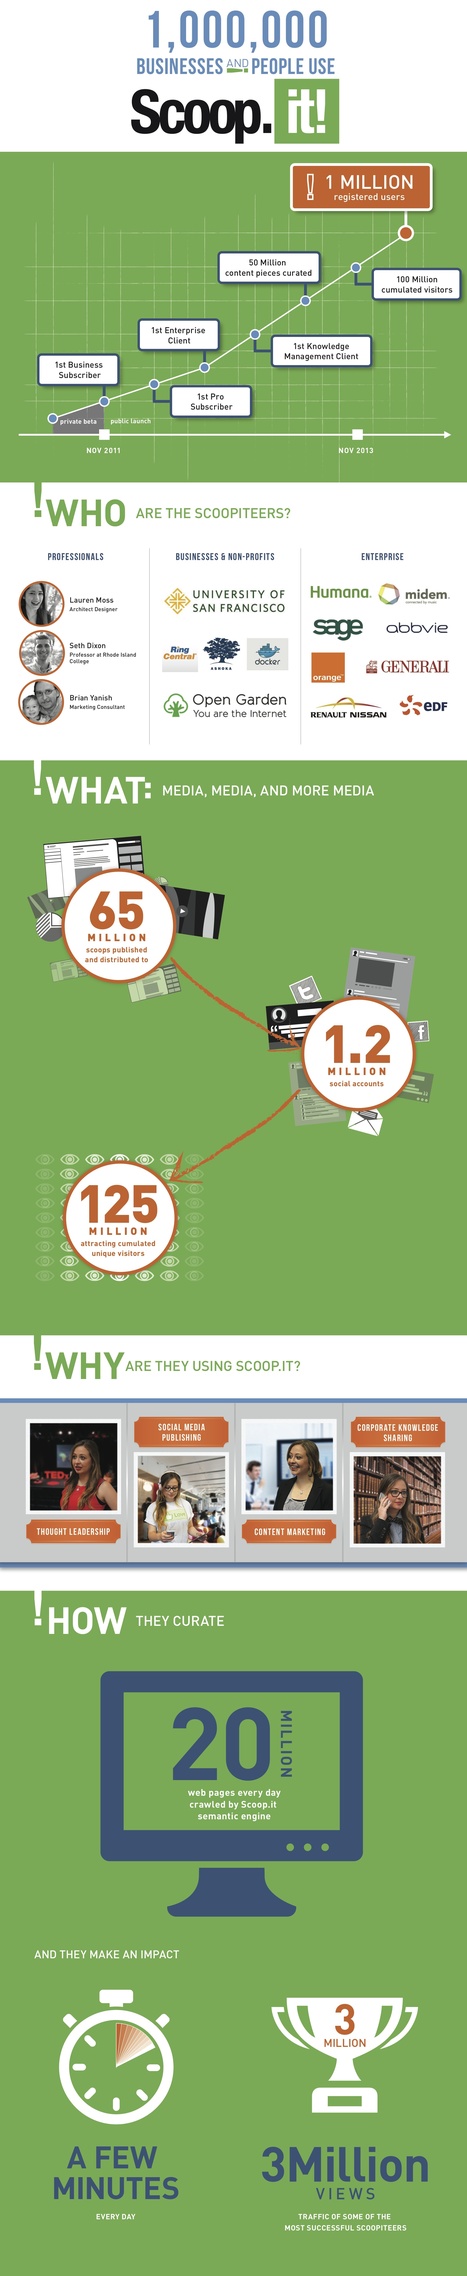 Curation: 1,000,000 people and businesses are now using Scoop.it! [Infographic] | Didactics and Technology in Education | Scoop.it